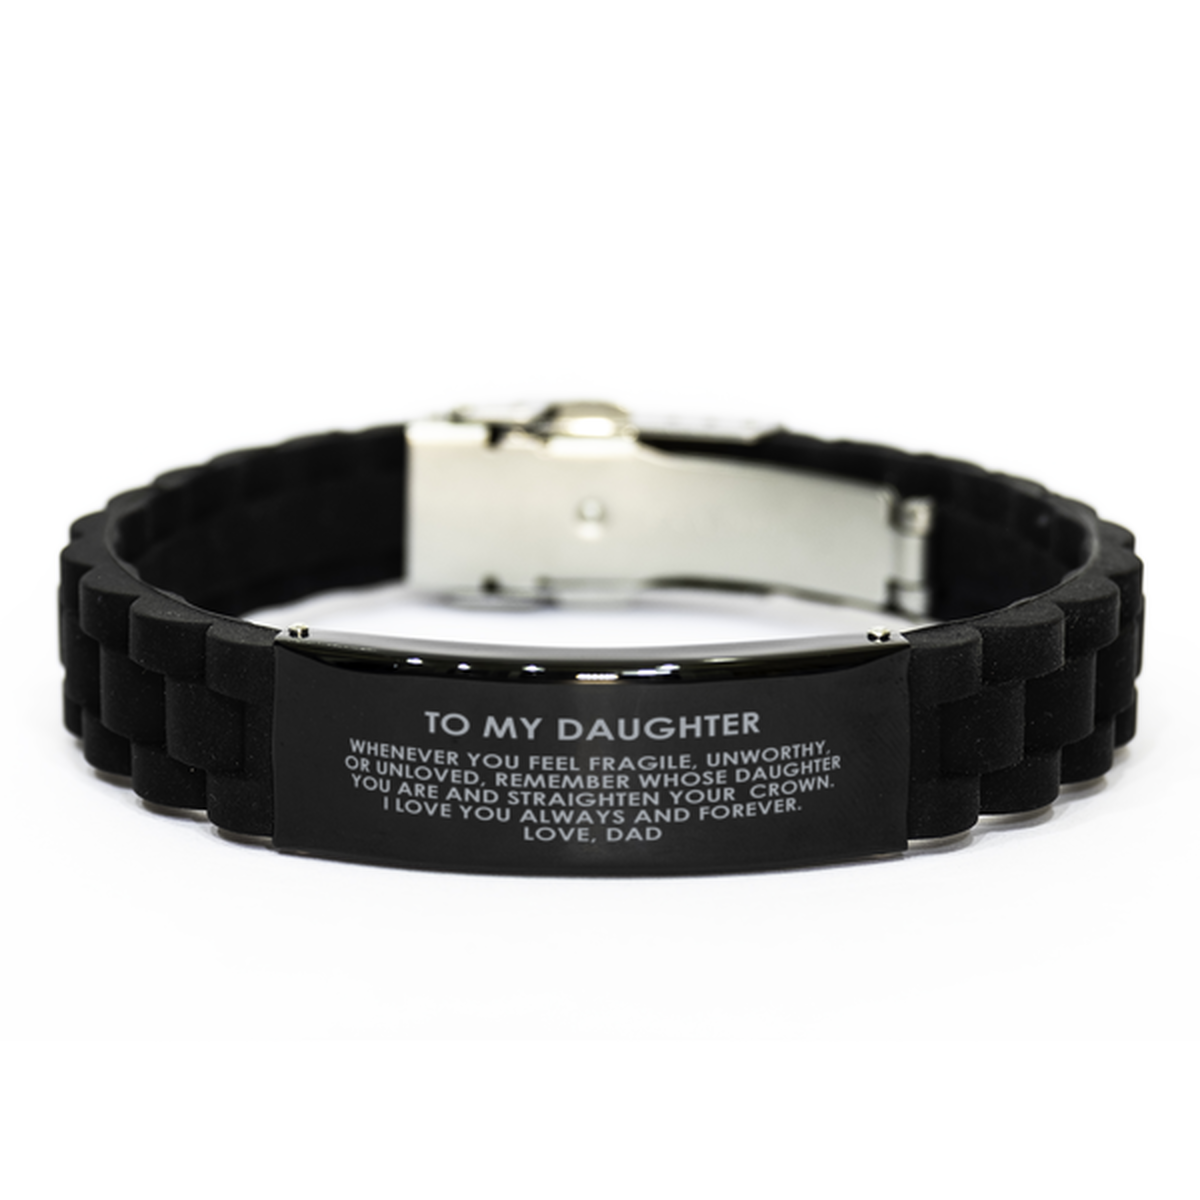 To My Daughter Black Bracelet, I Love You Always And Forever, Birthday Gifts For Daughter From Dad, Christmas Gifts For Women